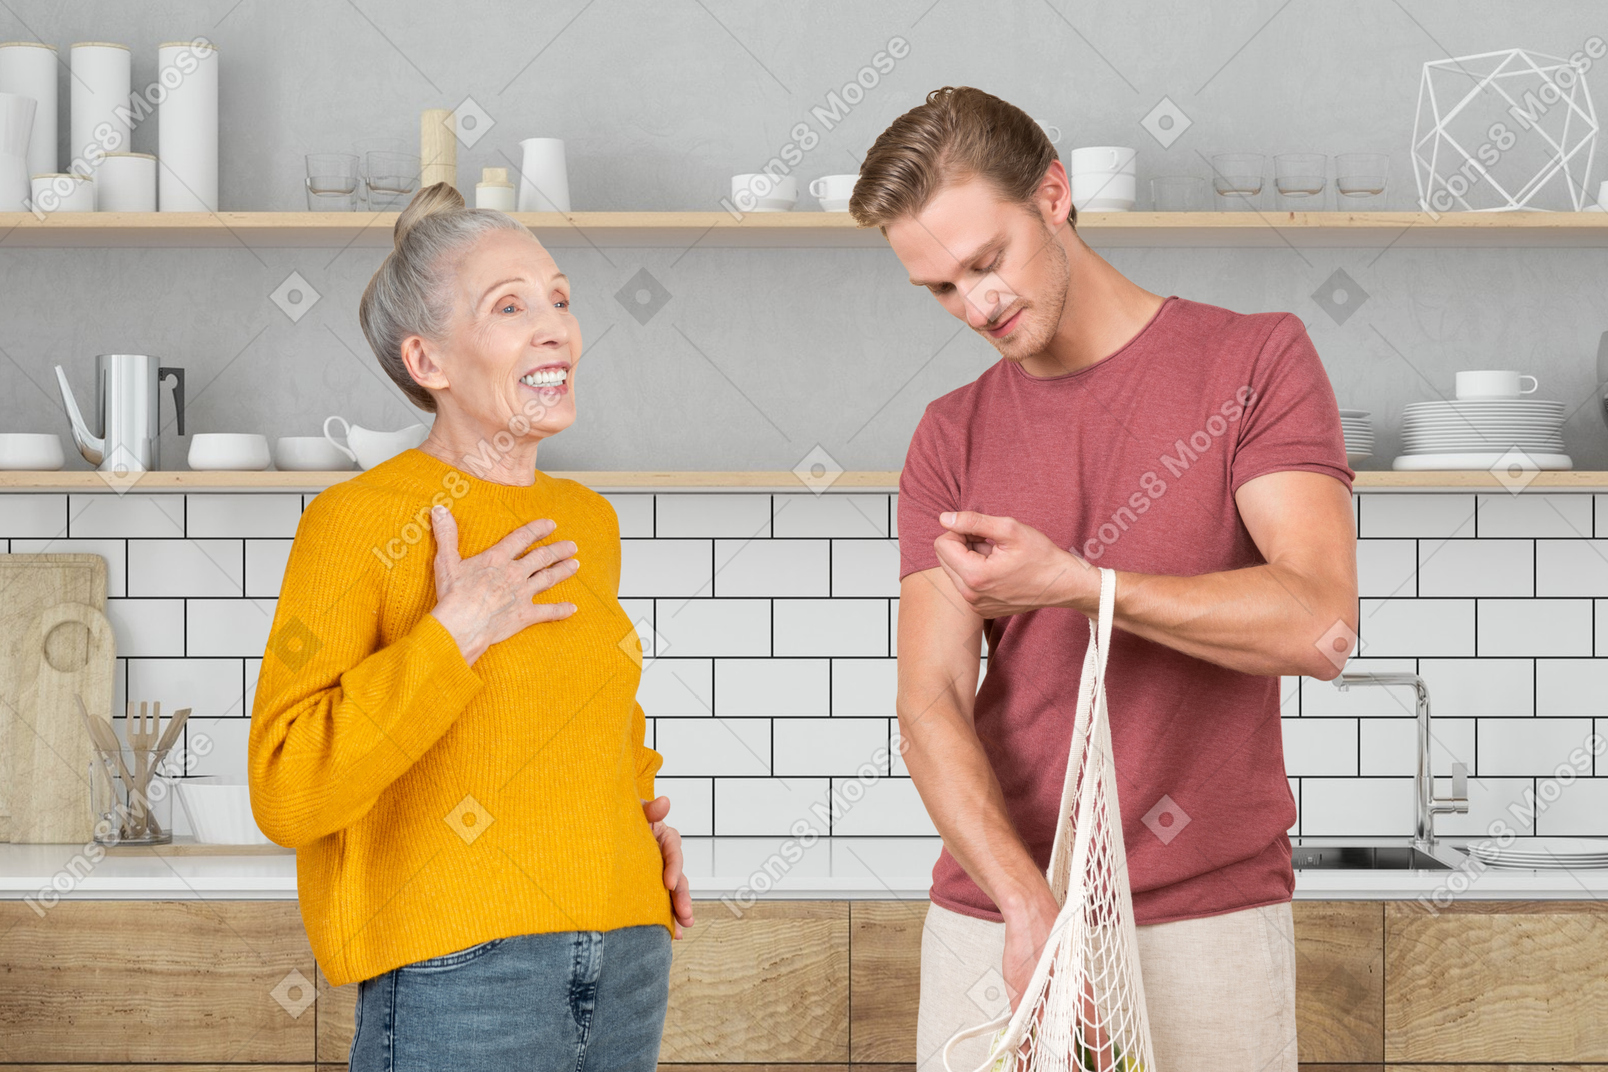 A man is taking groceries out of bag next to a laughing older woman